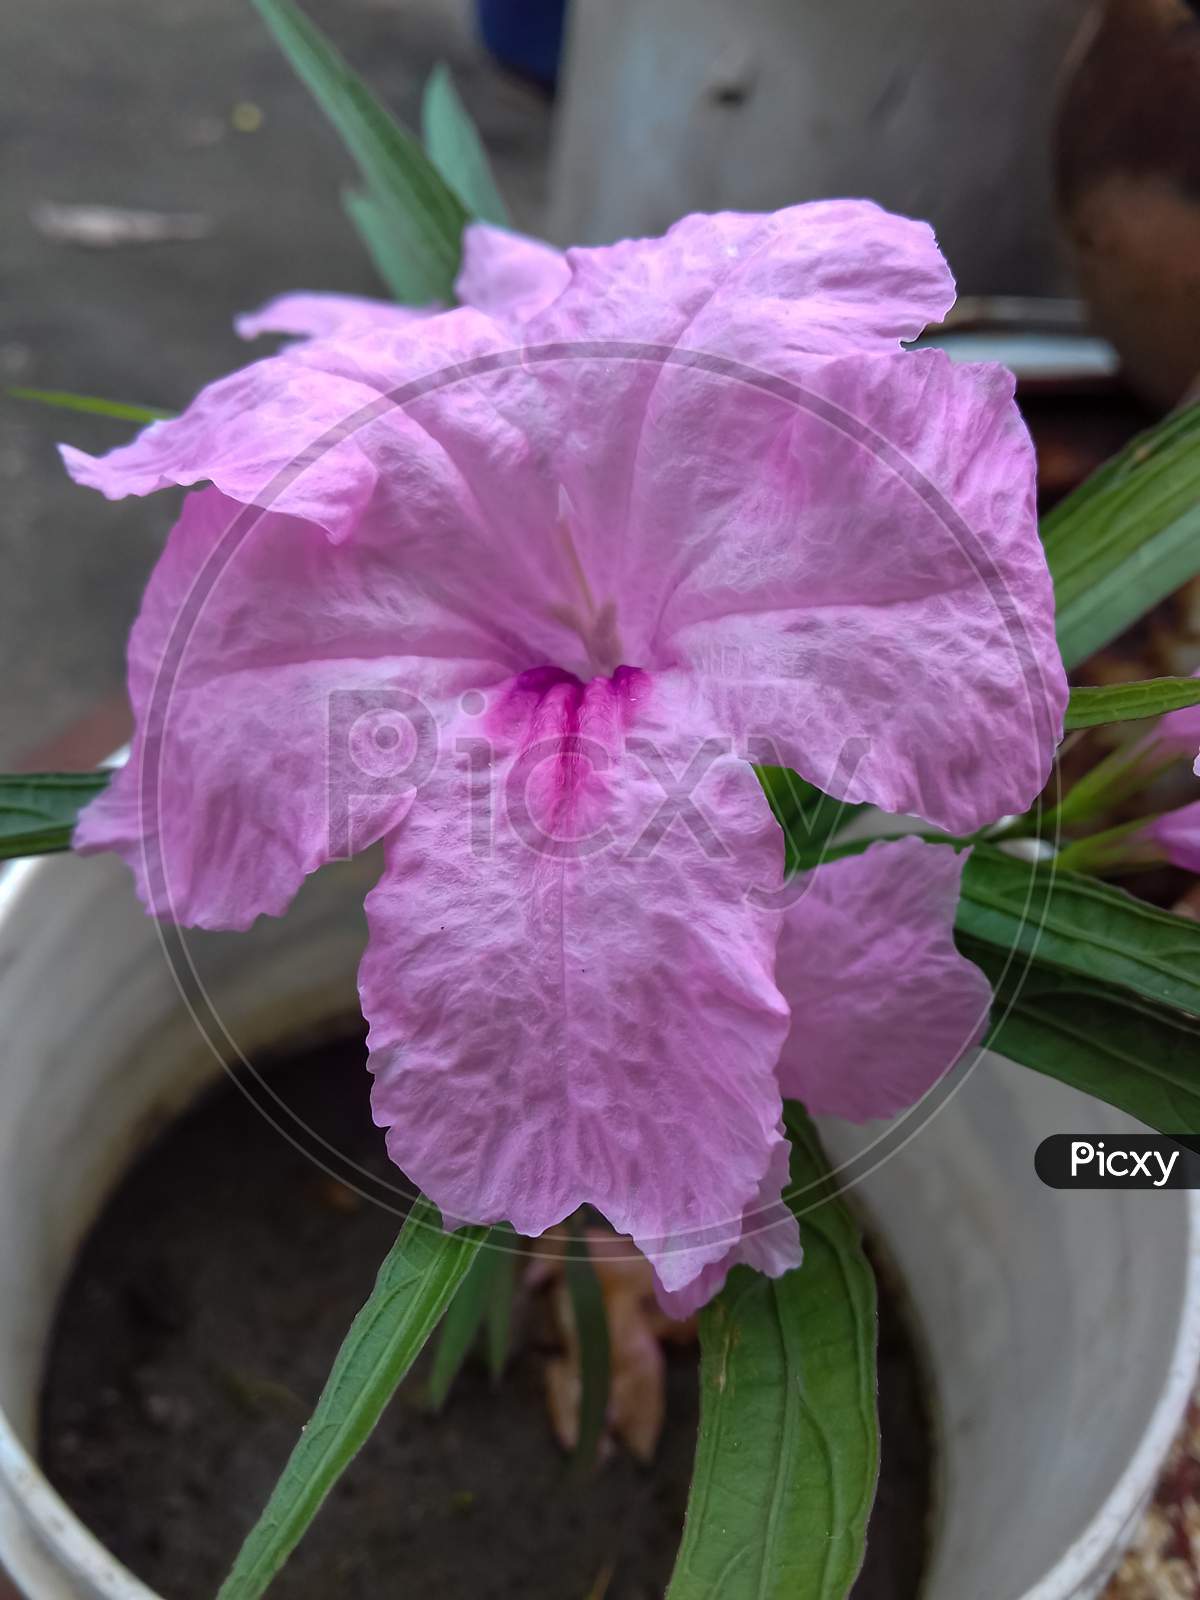 Mexican petunia flower plant or Ruellia simplex or Mexican bluebell or Britton's wild petunia flower plant; soft pink in color